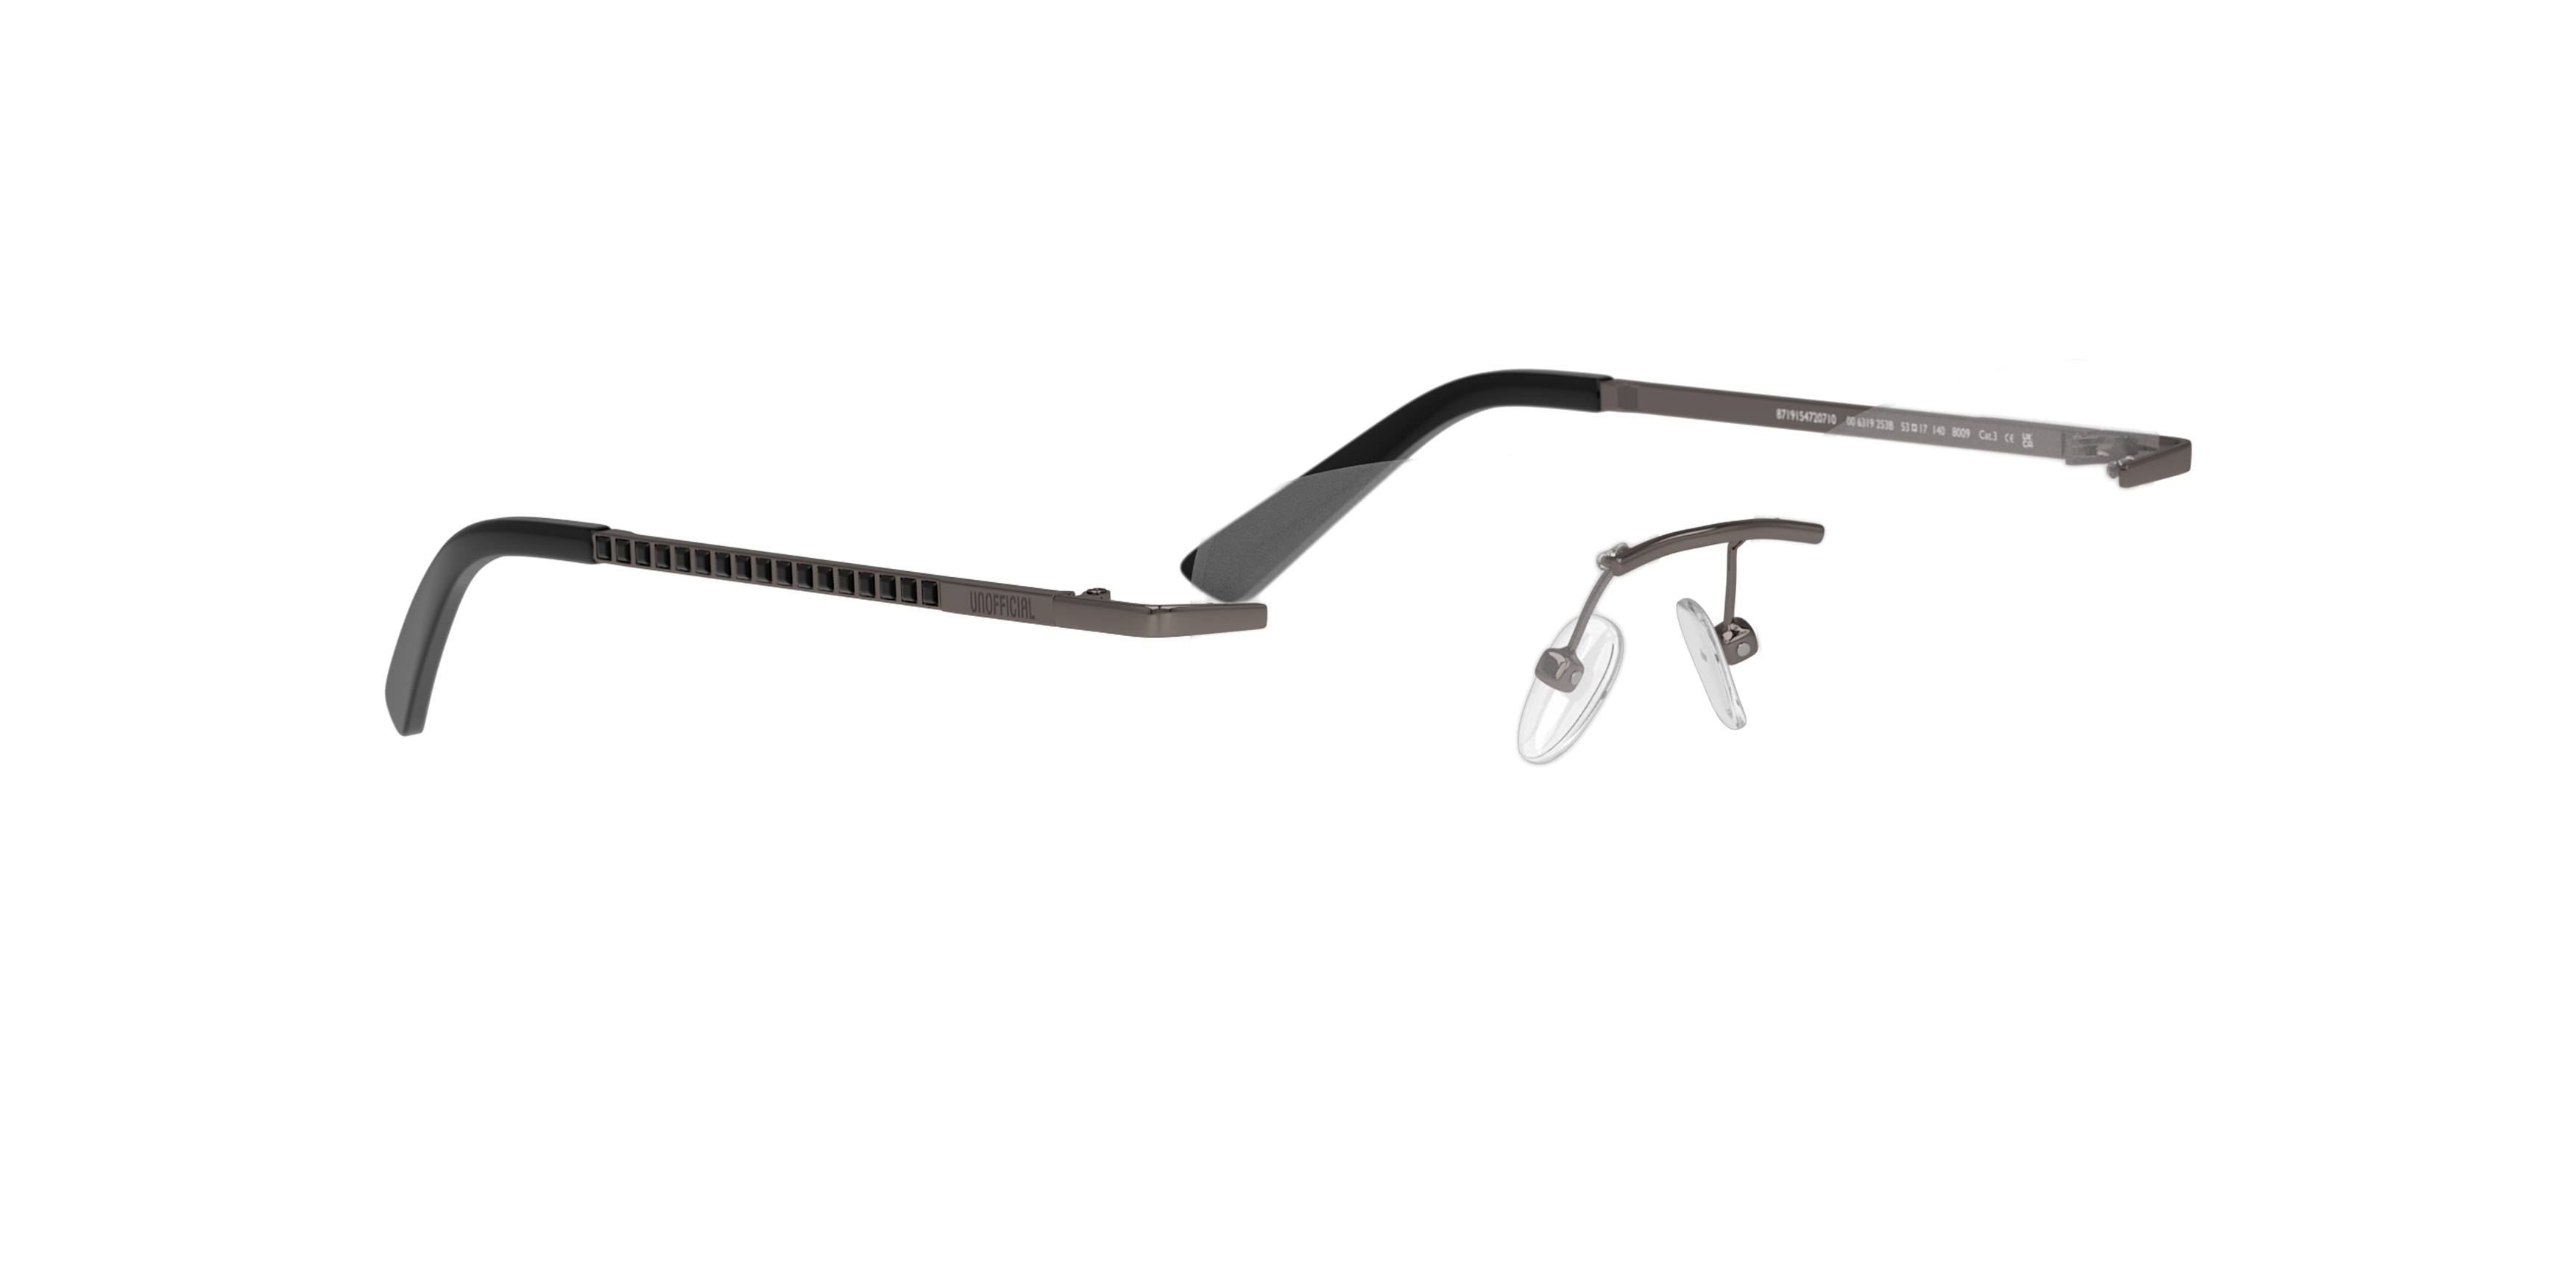 Angle_Right01 Unofficial UNOF0468 (GG00) Glasses Transparent / Grey